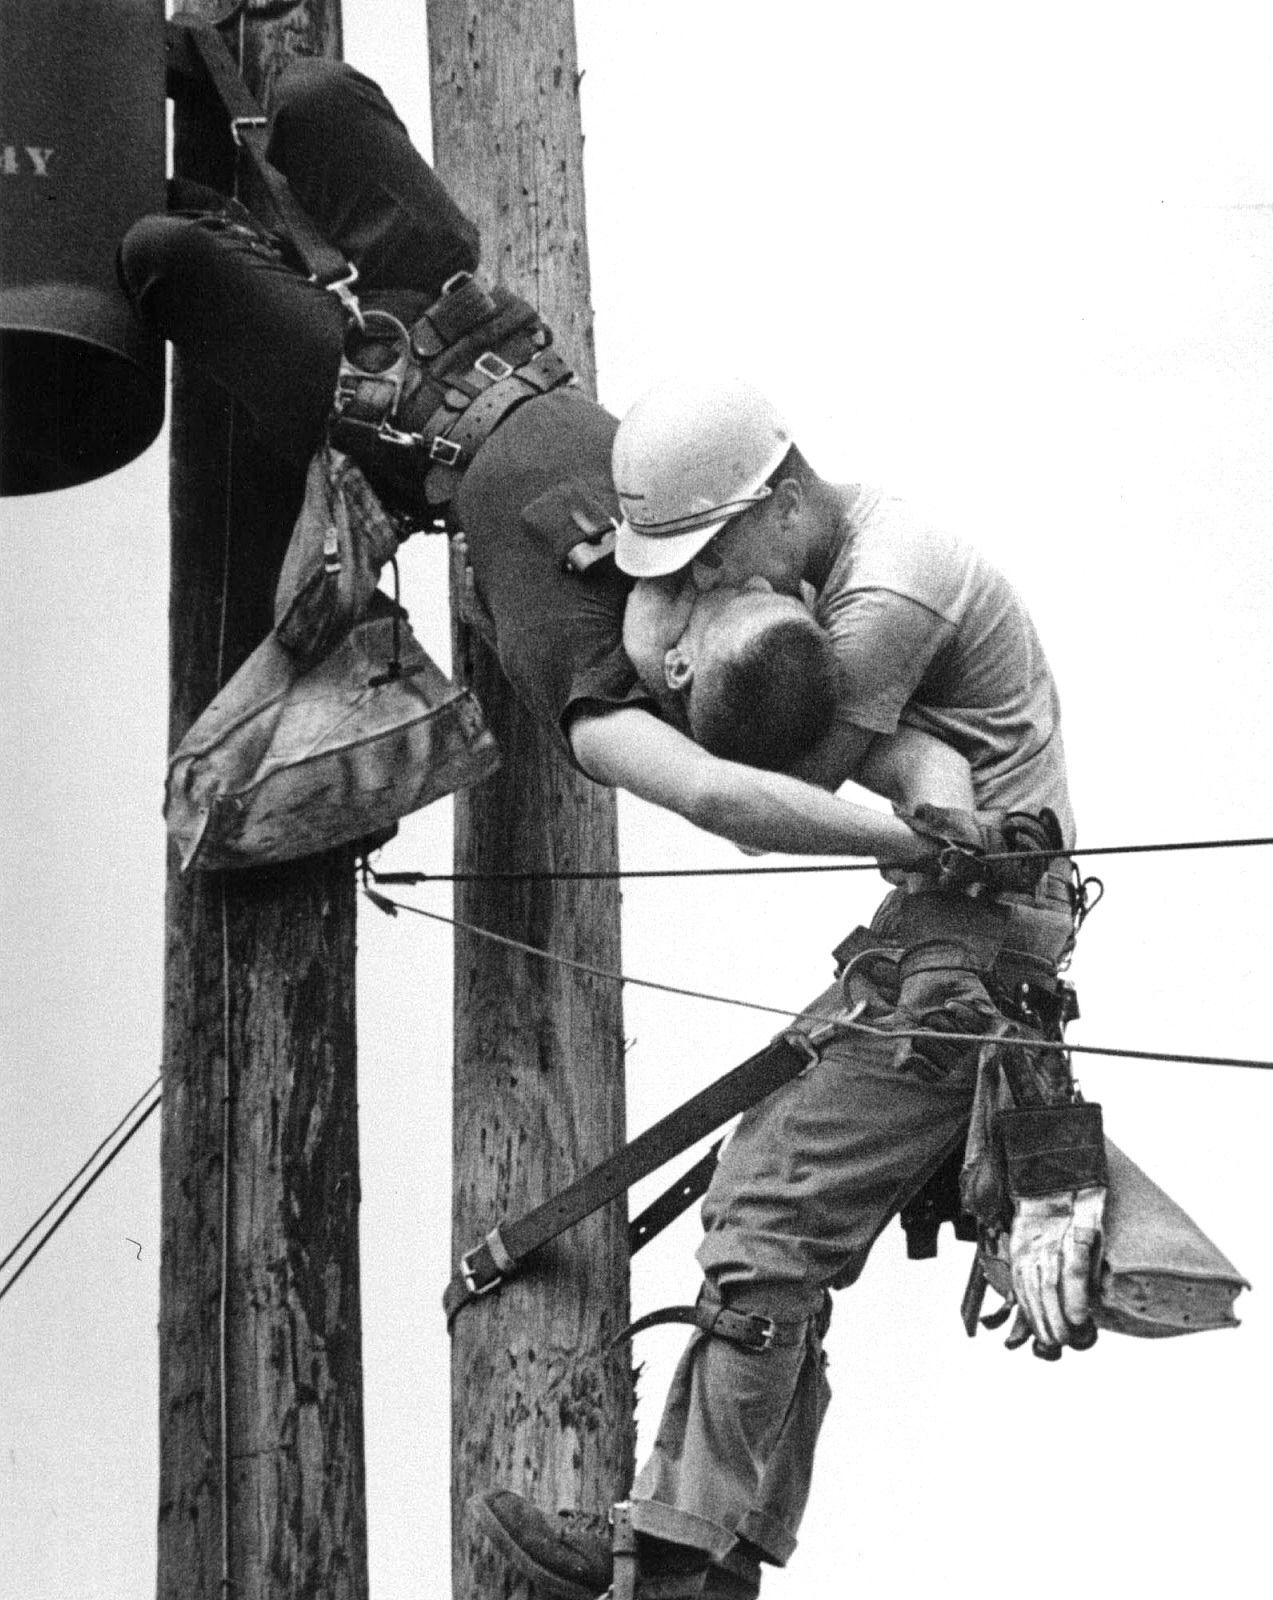  Kiss of Life. Utility worker, J.D. Thompson, suspended on a utility pole and giving